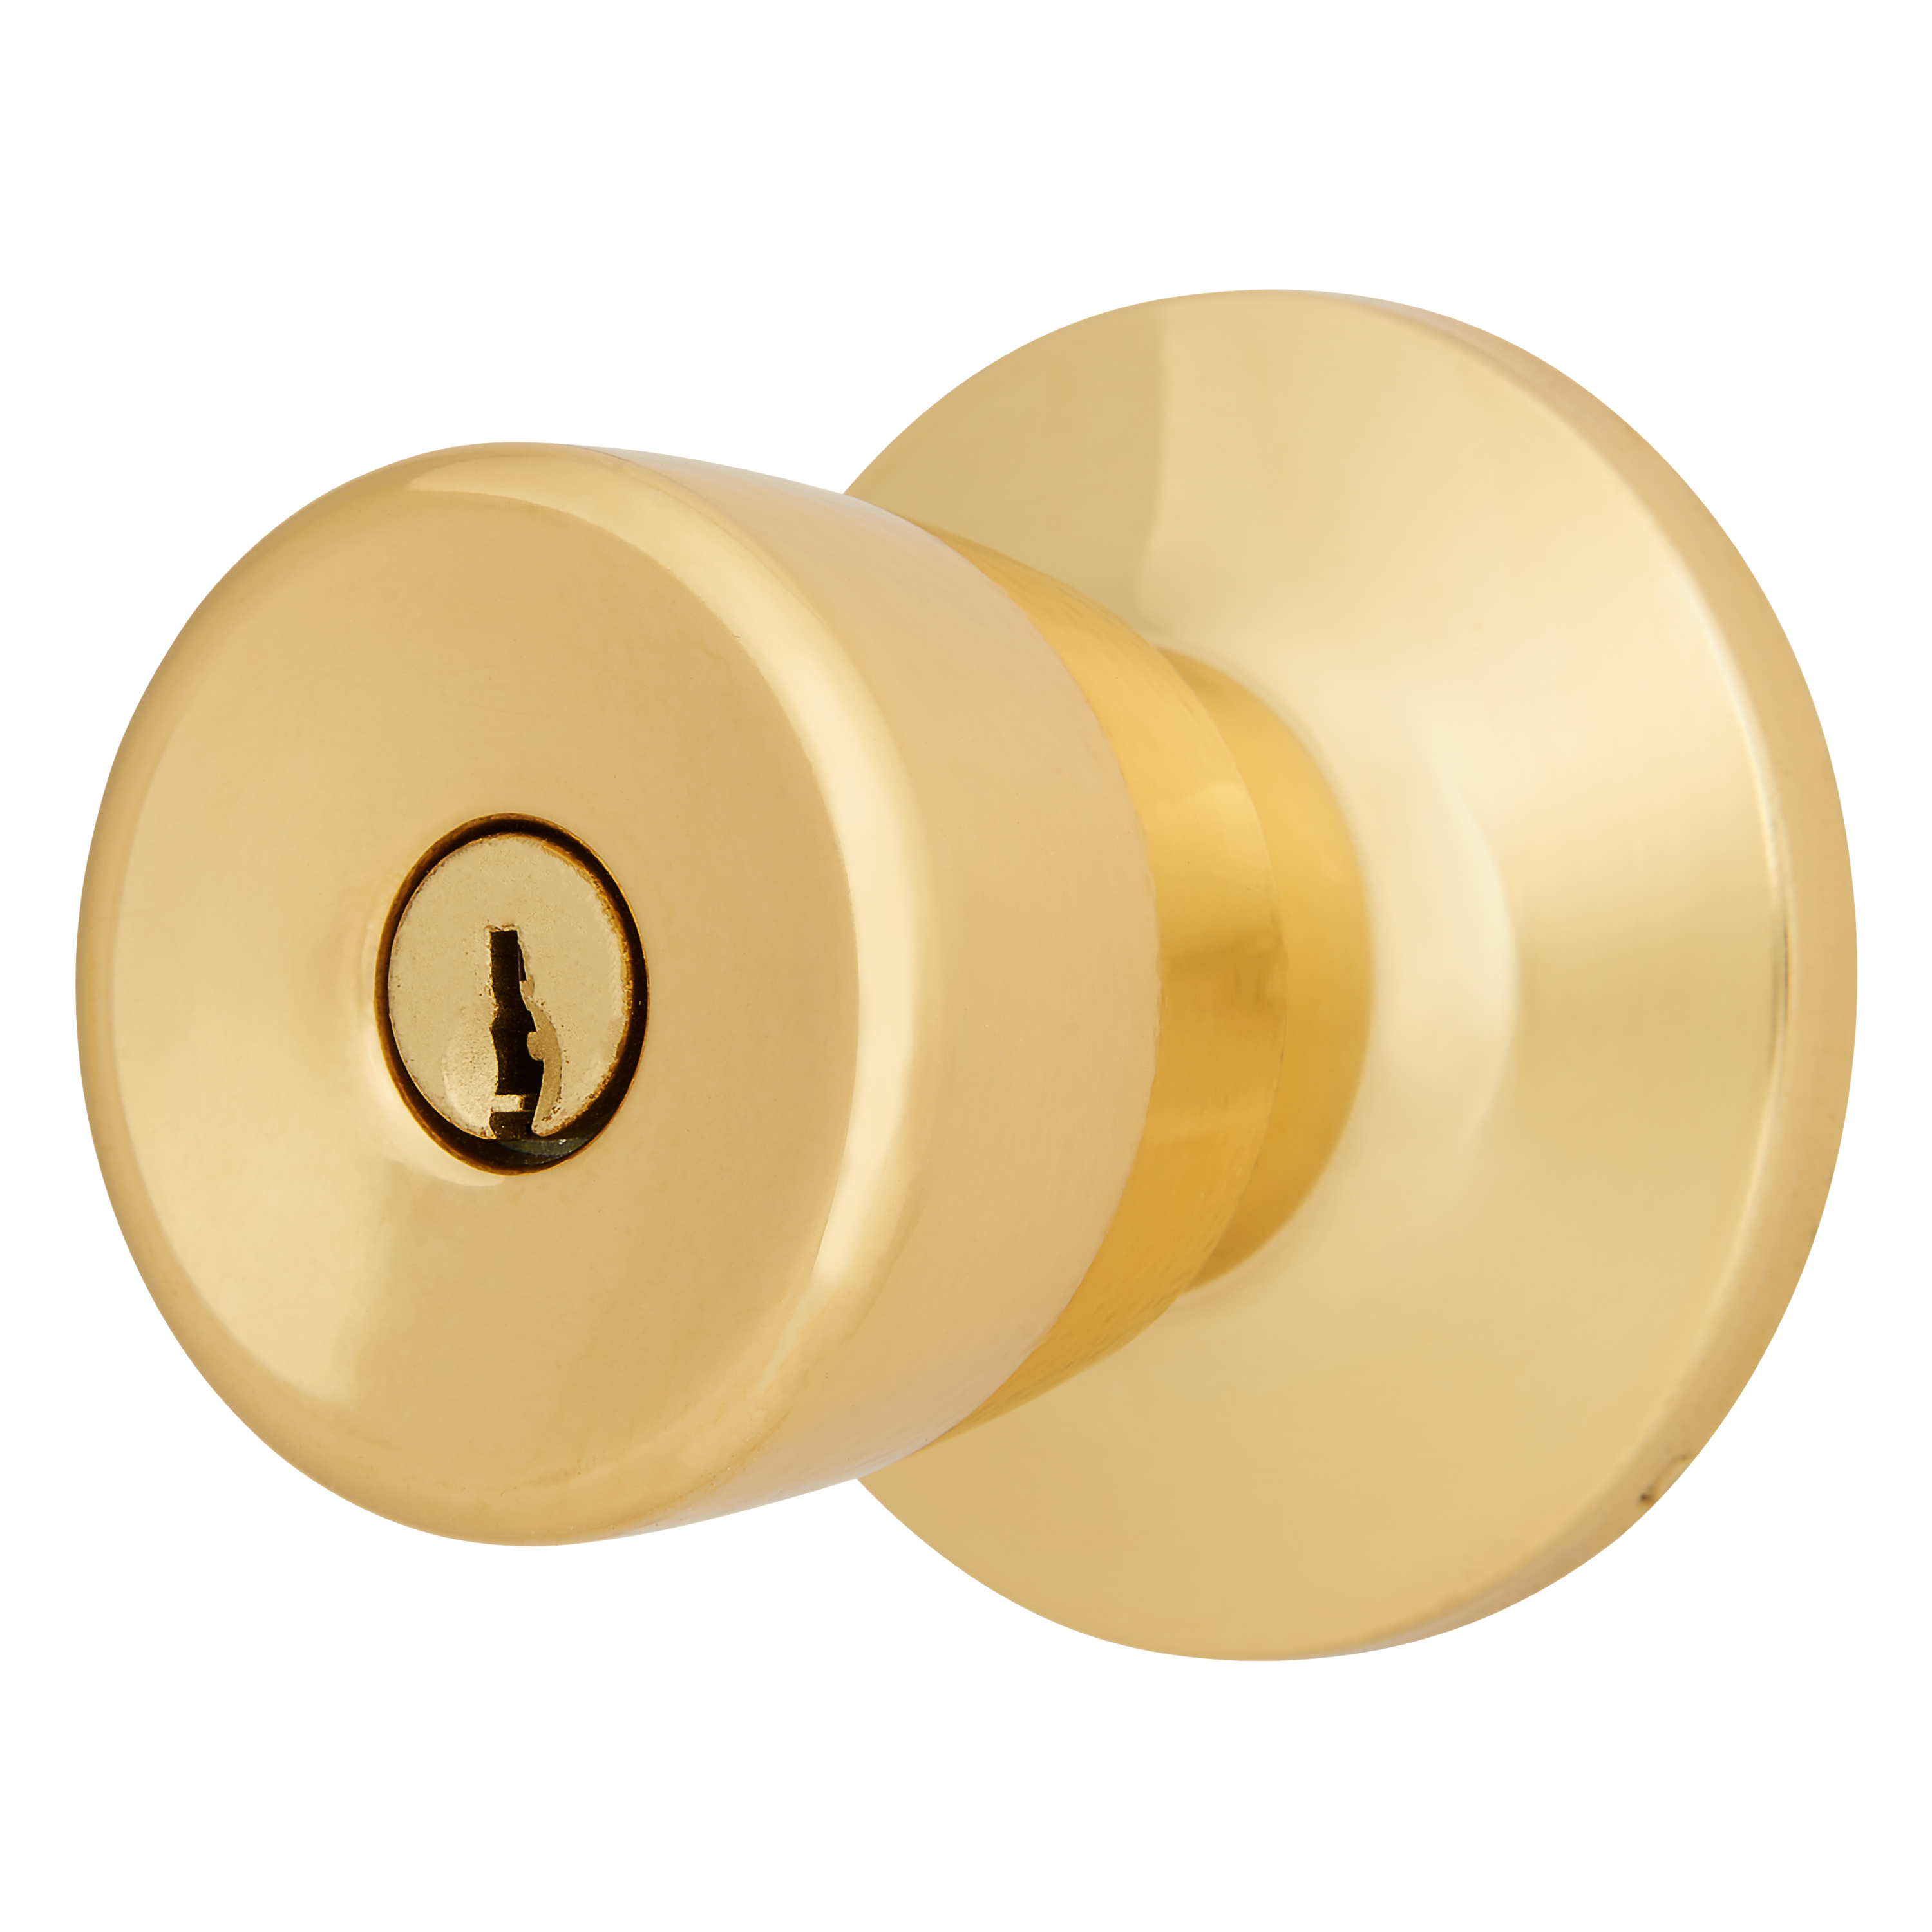 Brinks Keyed Entry Mobile Home Bell Style Doorknob, Polished Brass Finish - image 4 of 11